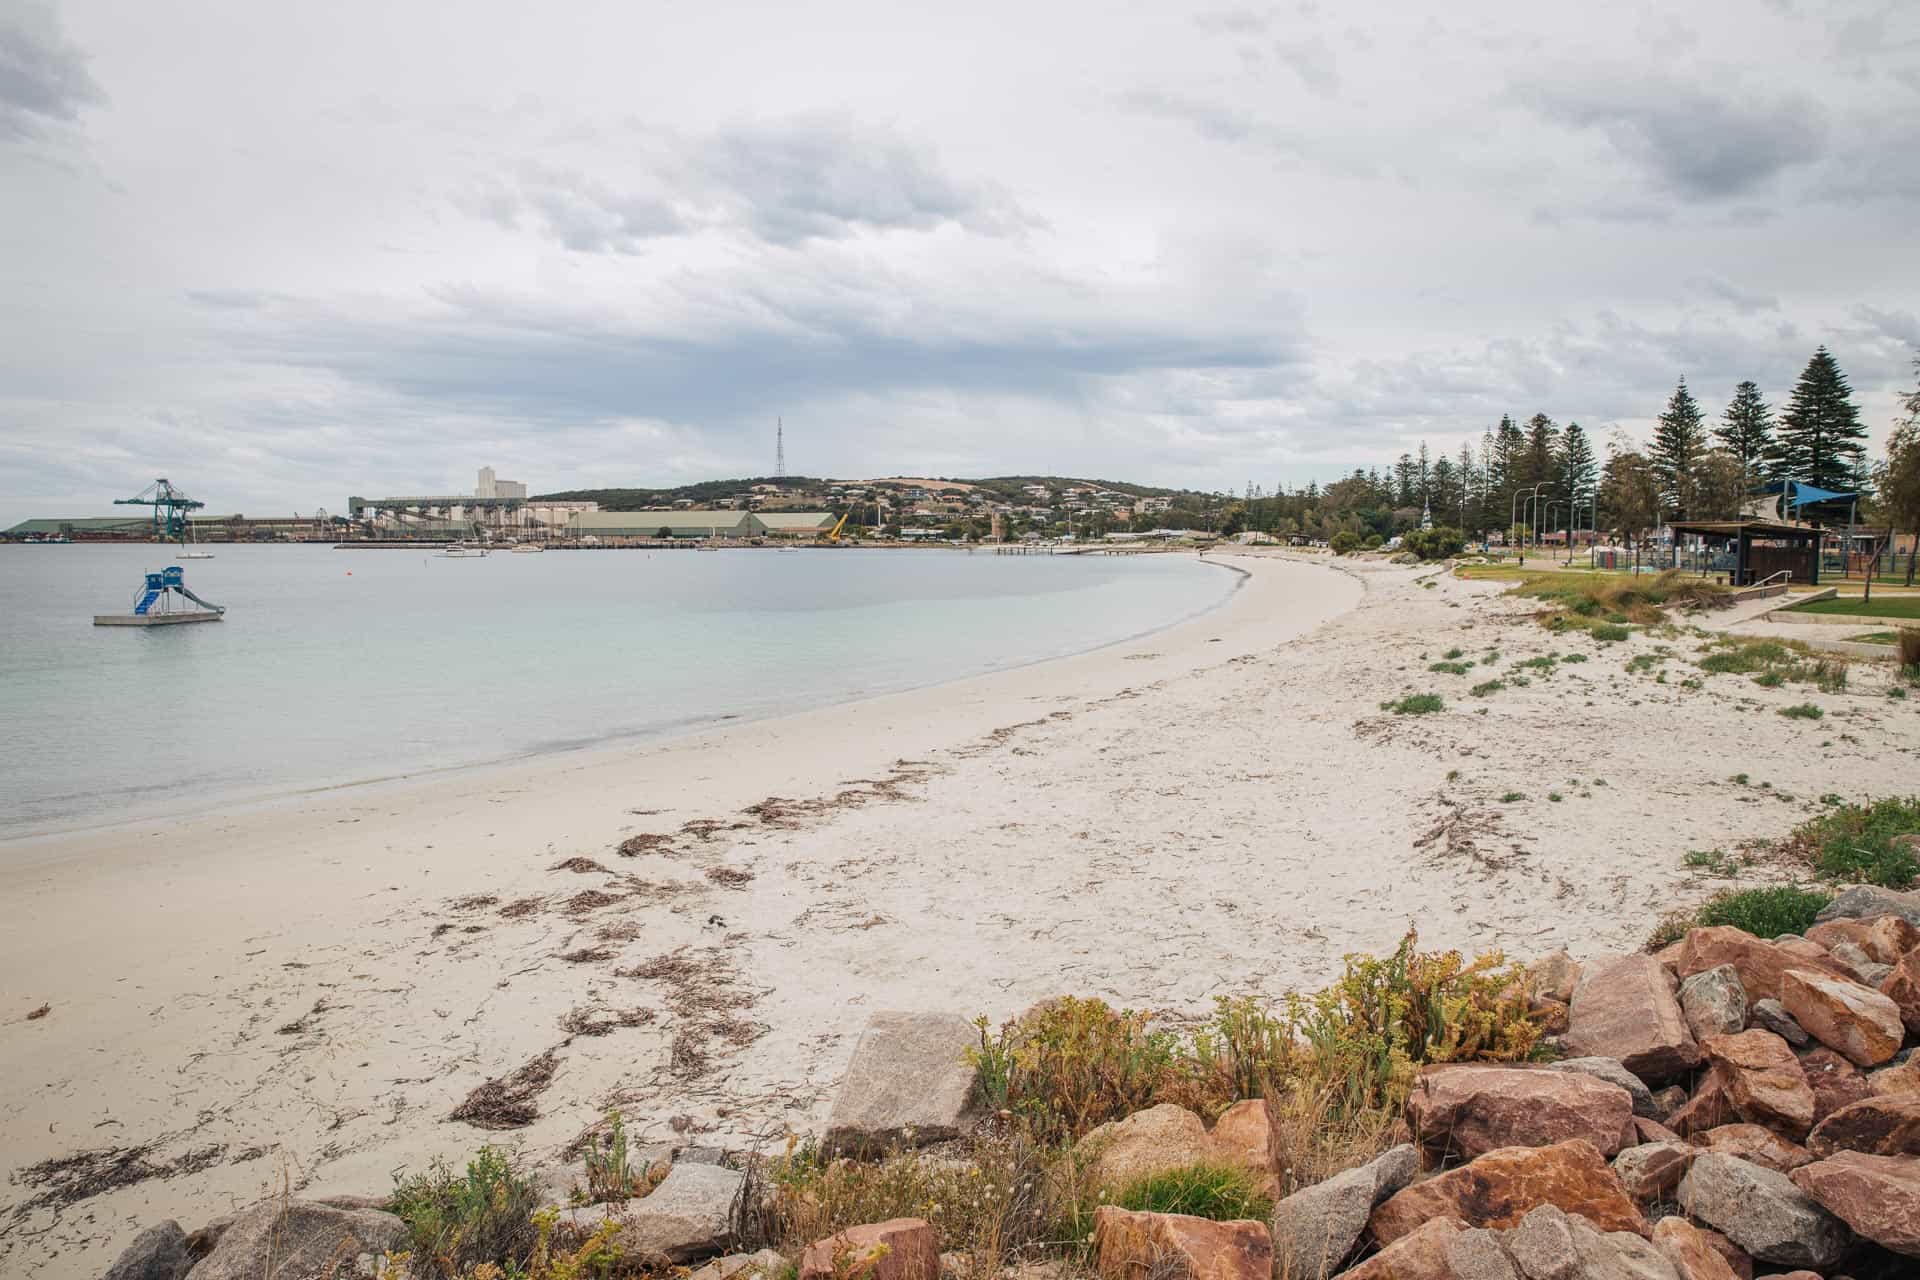 things to do in esperance, what to do in esperance, esperance things to do, esperance attractions